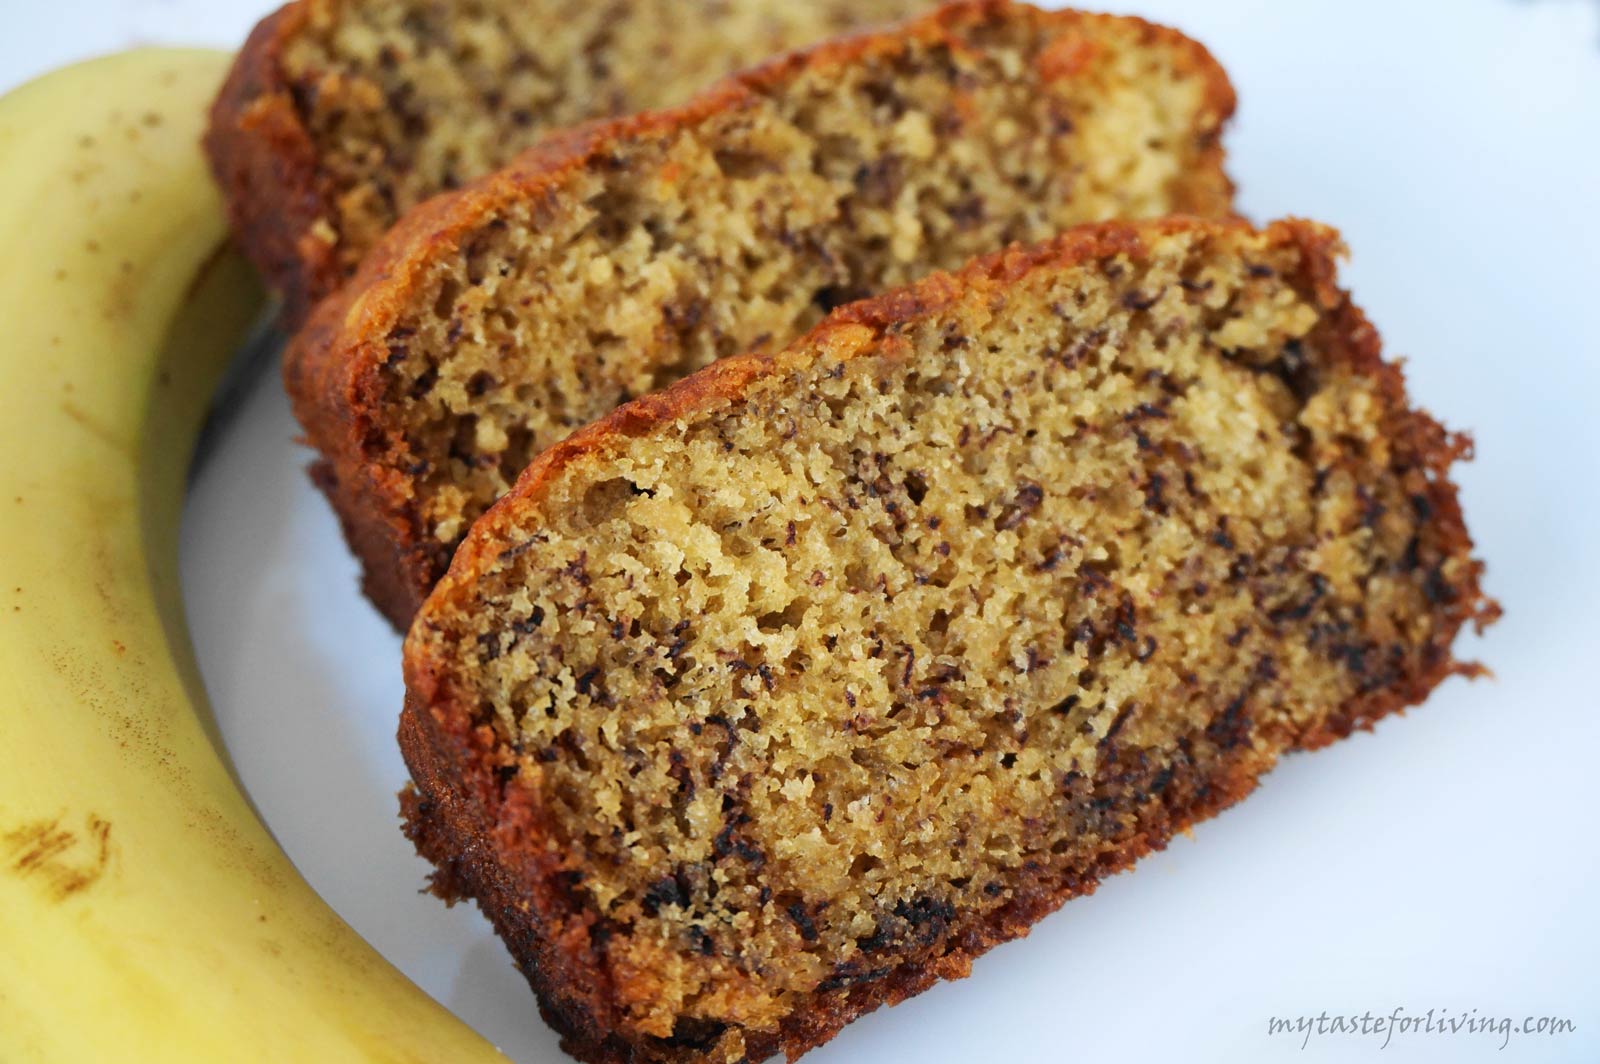 Delicious banana cake with cinnamon and vanilla aroma, prepared without yoghurt or whole milk.